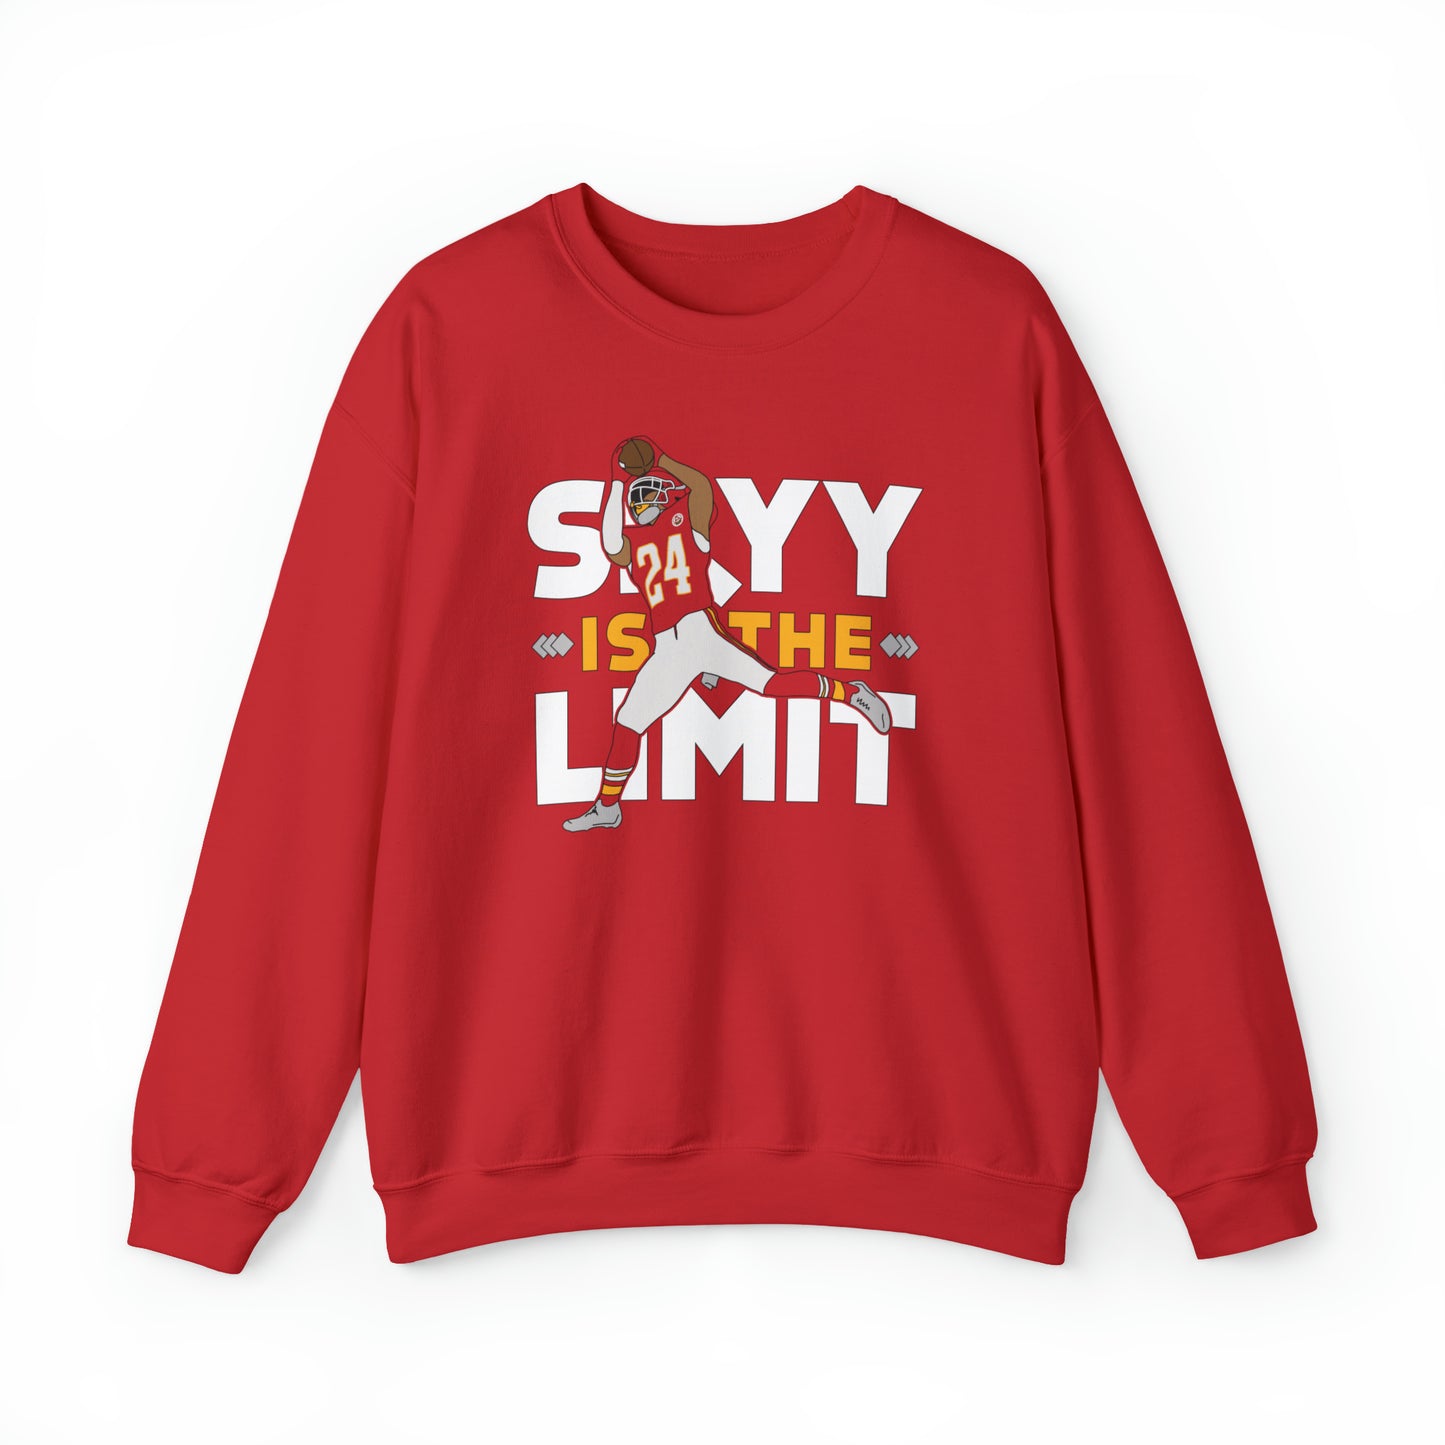 KC Swag Kansas City Chiefs White & Gold Skyy Is The Limit (with football player) on a Red Crewneck Sweatshirt 